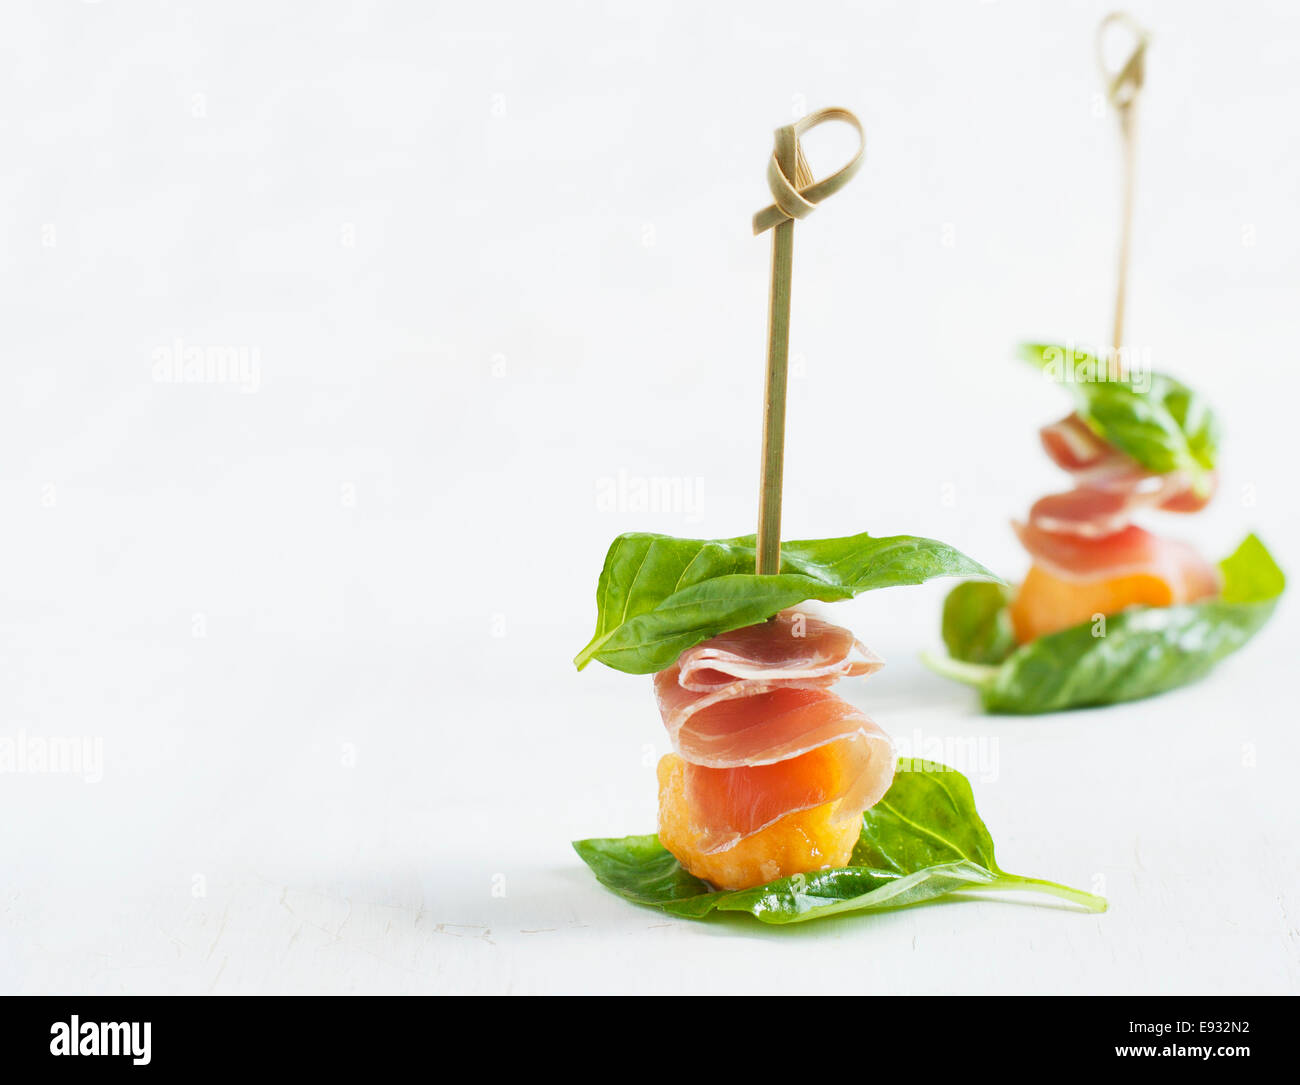 Appetizer with melon and prosciutto on skewers Stock Photo